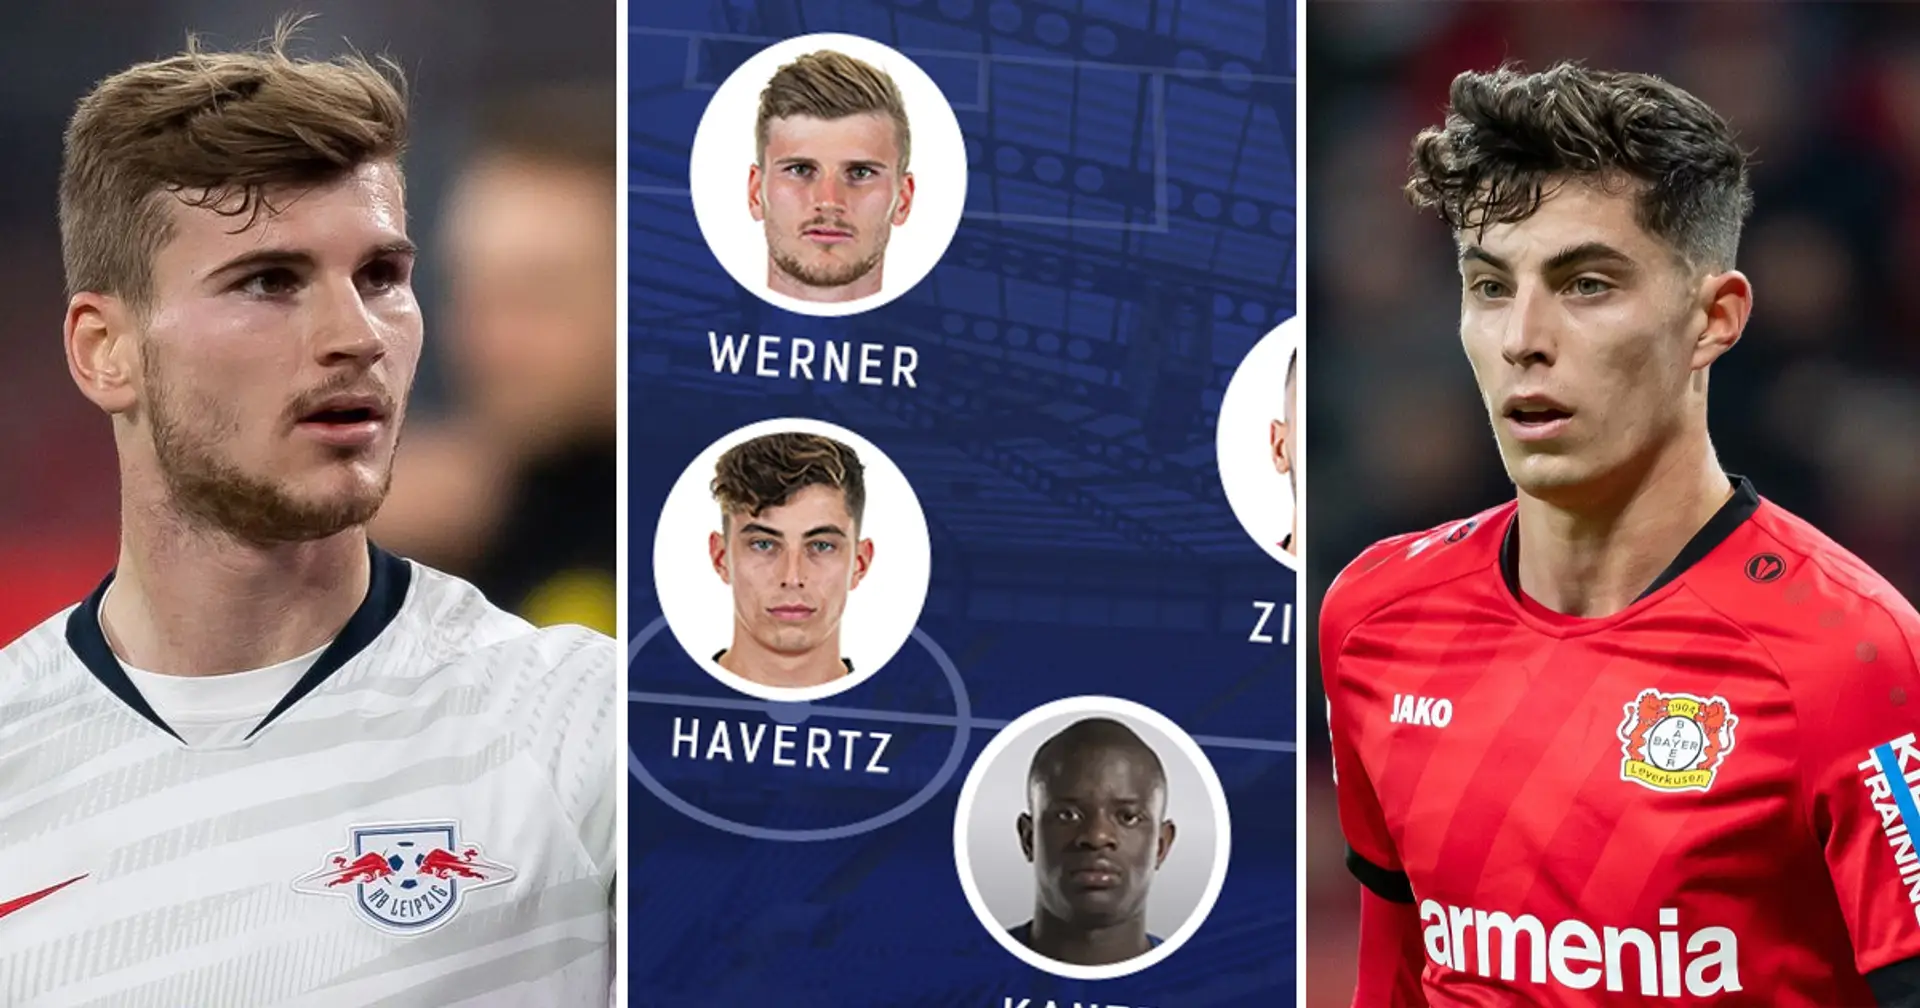 Bundesliga takeover at Stamford Bridge: Chelsea potential XI with Havertz and Werner in and how much it'd cost